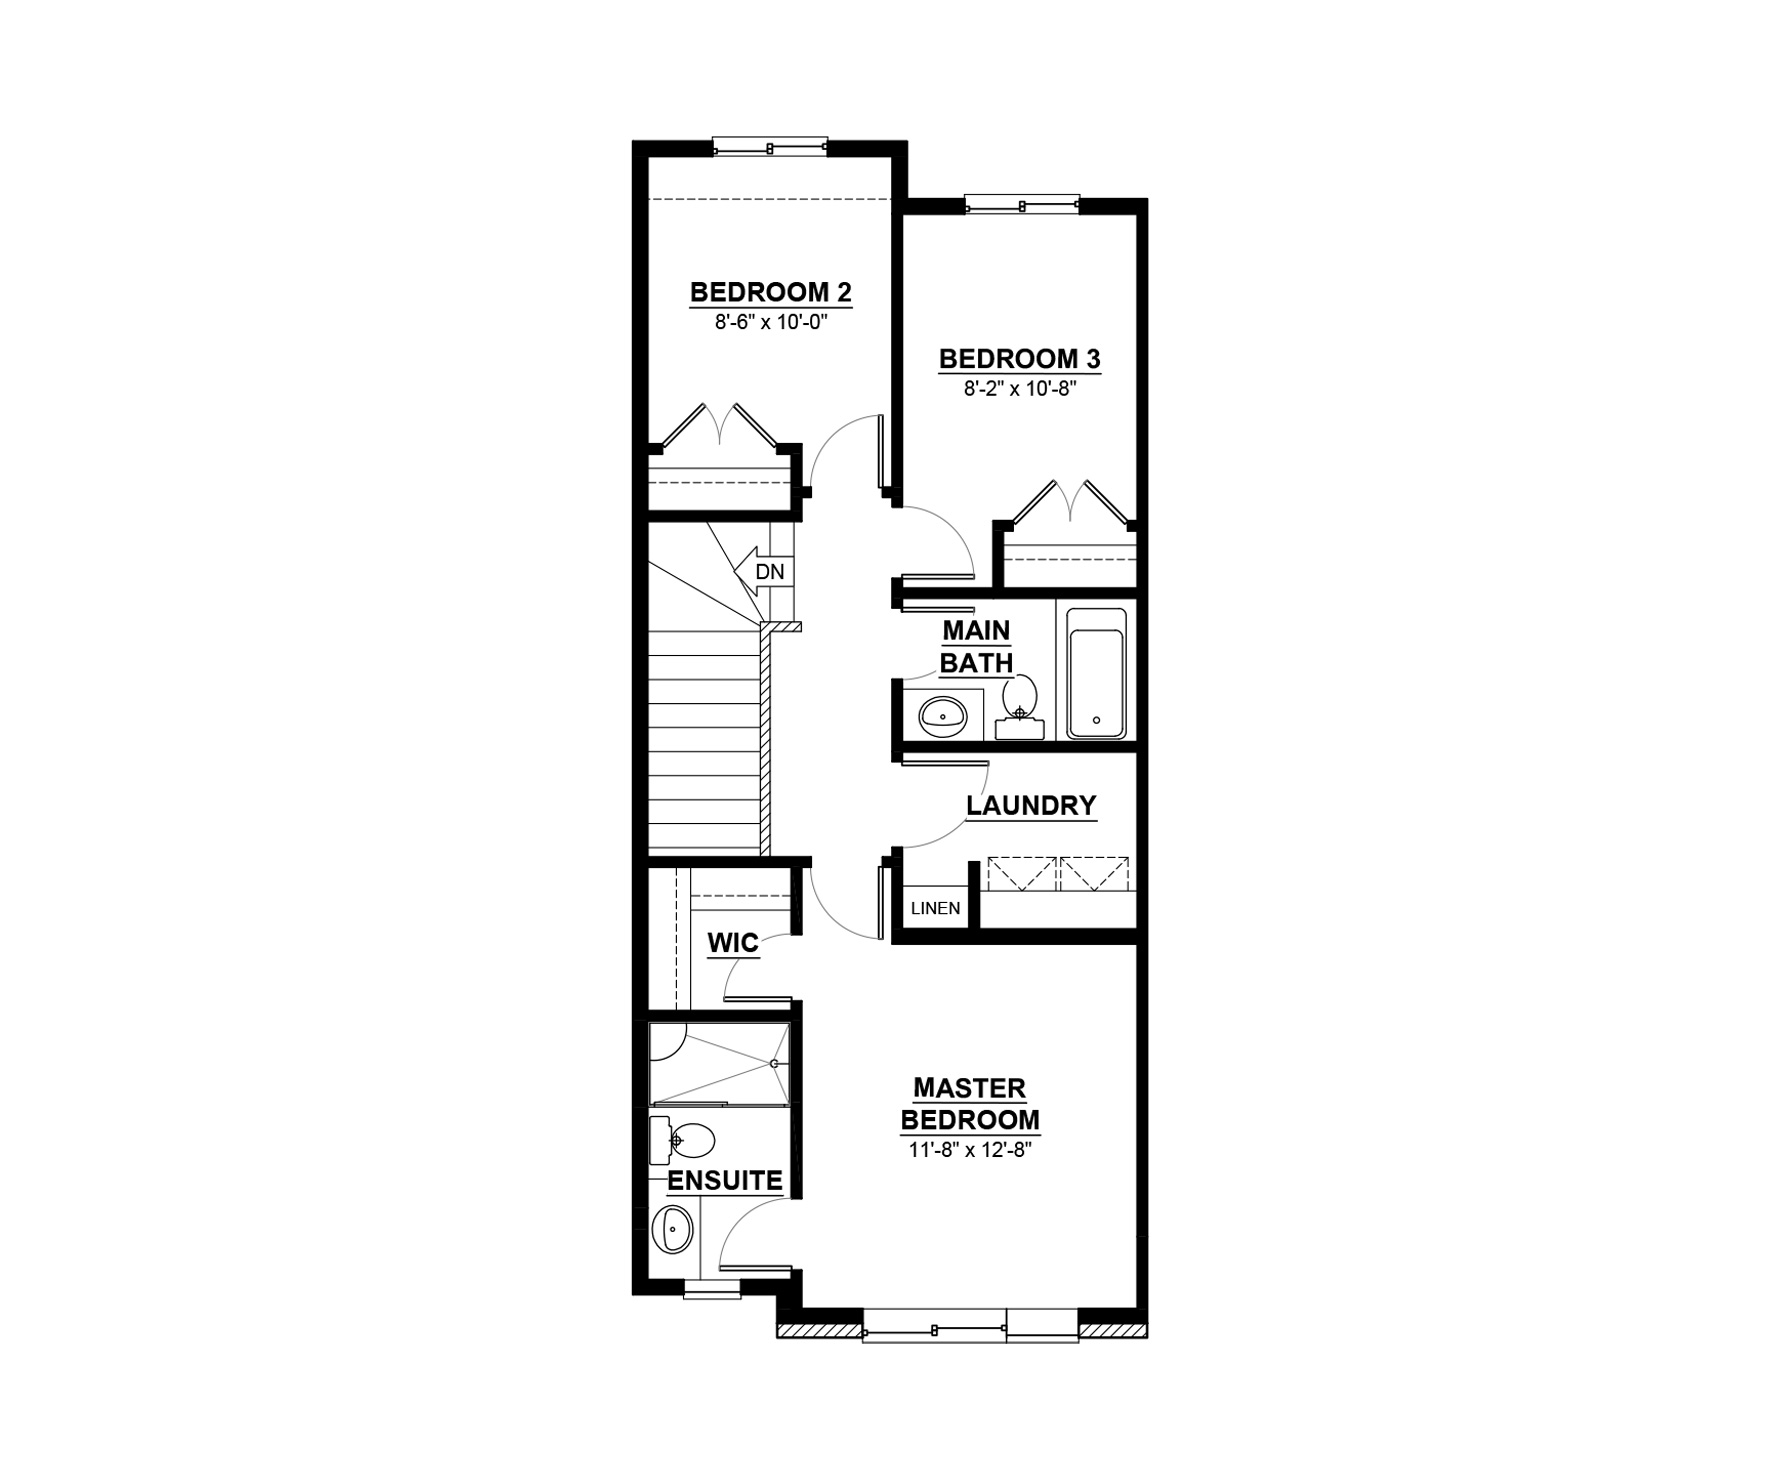 FOCUS-D Floor Plan of Crystallina Nera Daytona Homes with undefined beds